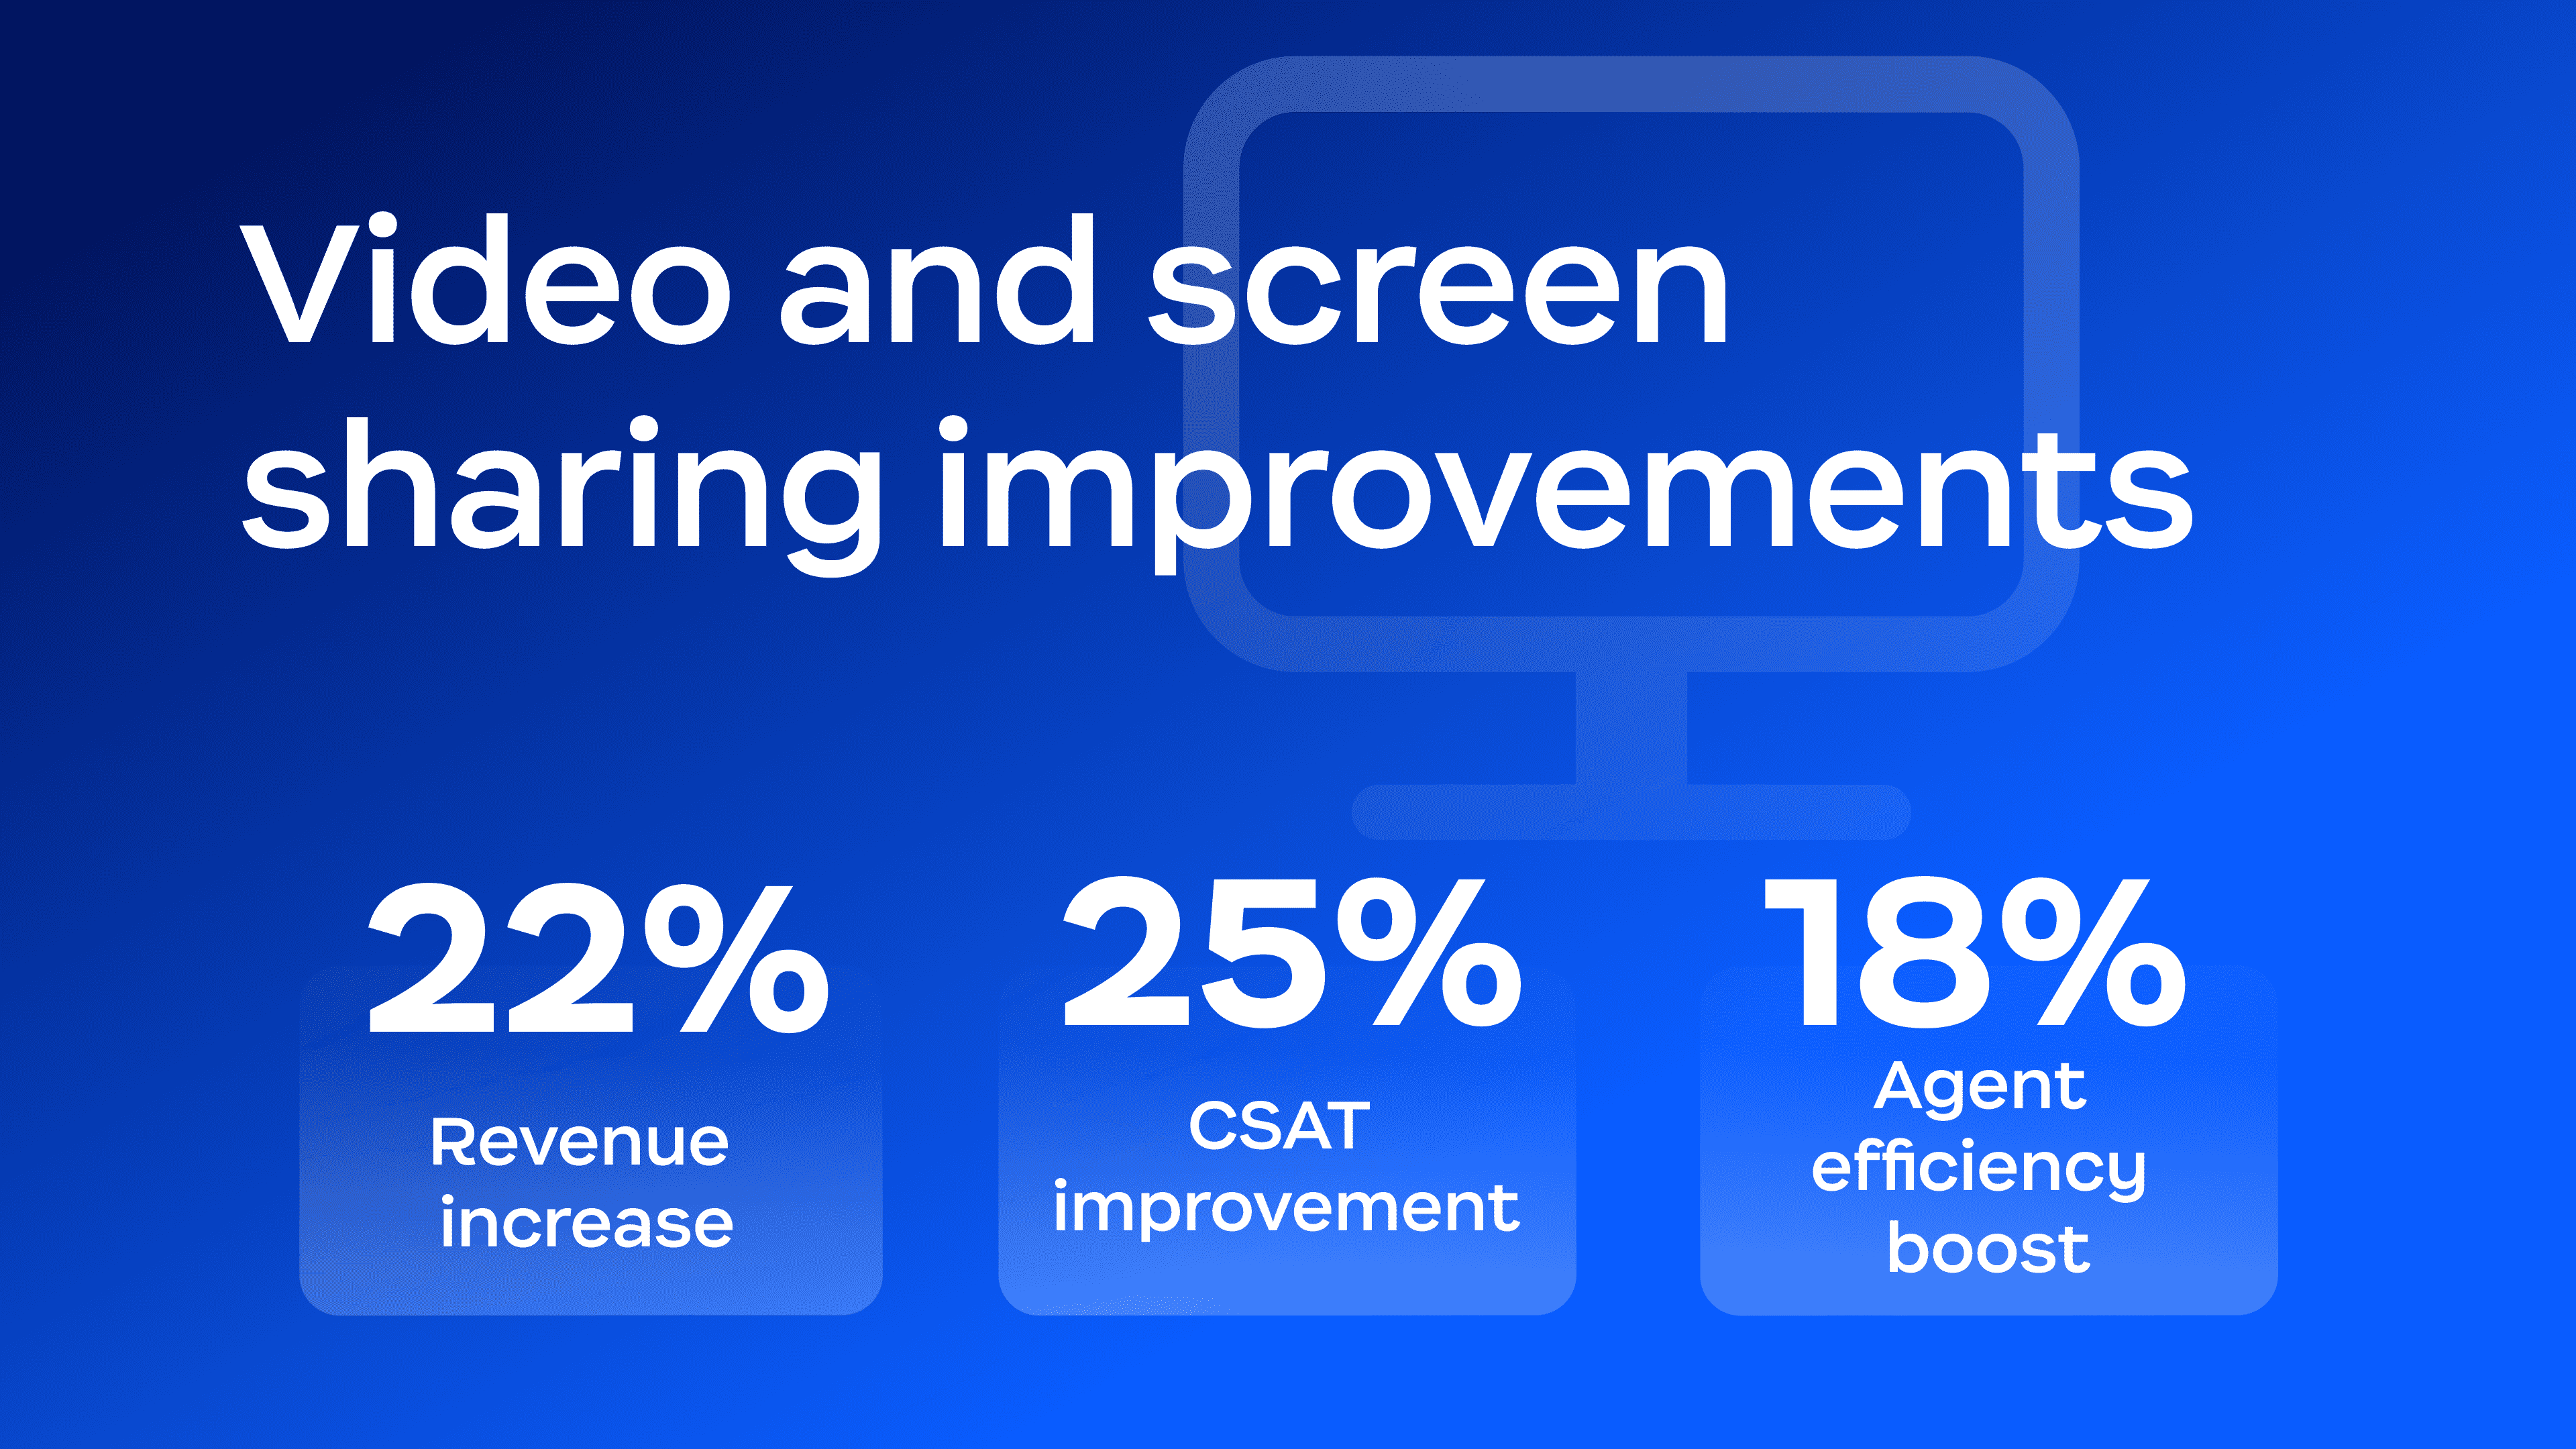 Statistics of the improvements contact centers benefit from when using video and screen sharing. 22% increase in revenue, 25% CSAT improvement and 18% agent efficiency boost, according to Metrigy report.